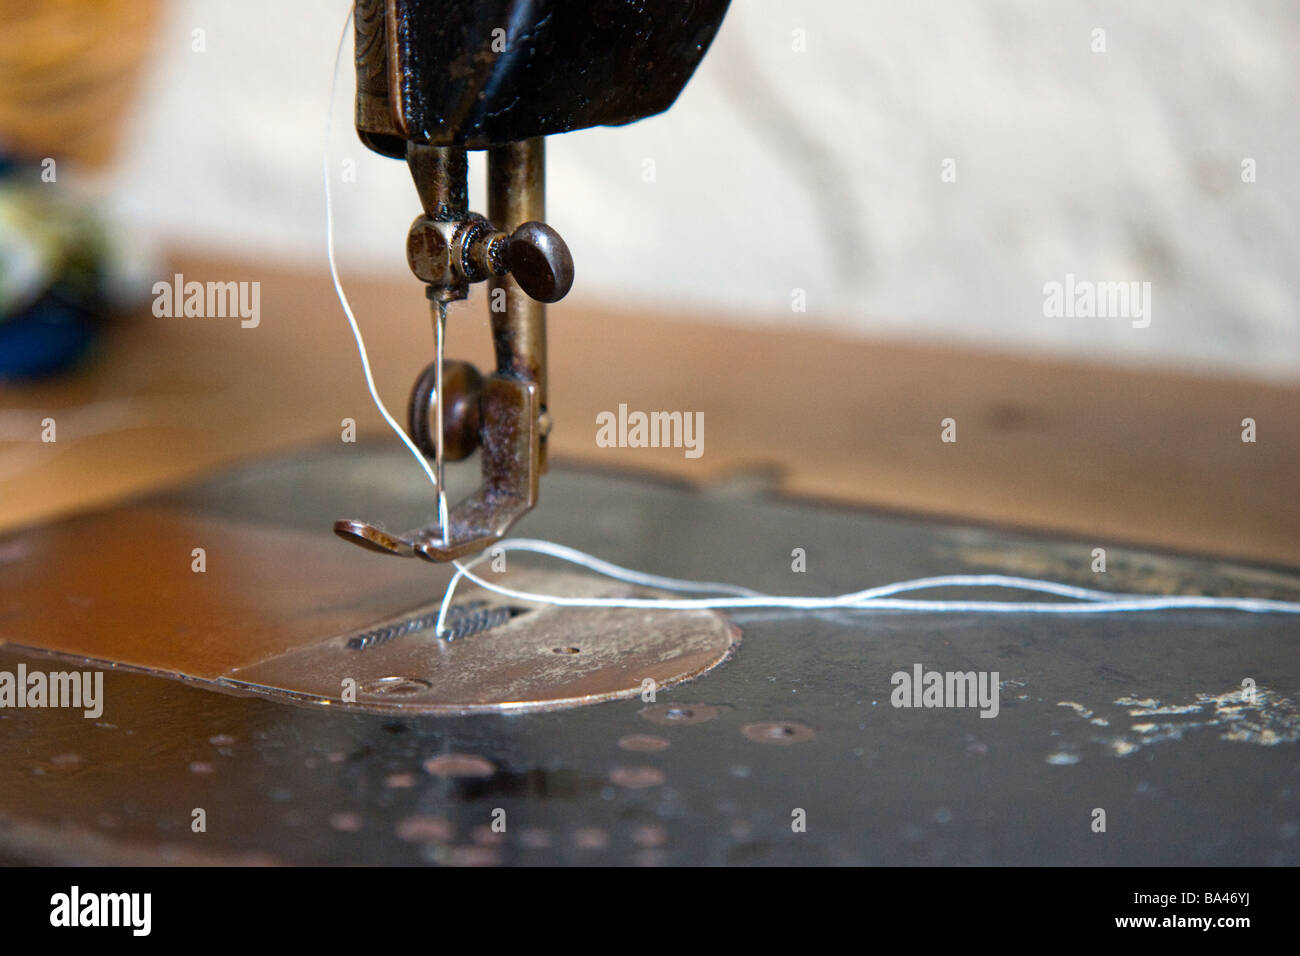 Old sewing machine, Singer, Germany, 20th century Stock Photo - Alamy